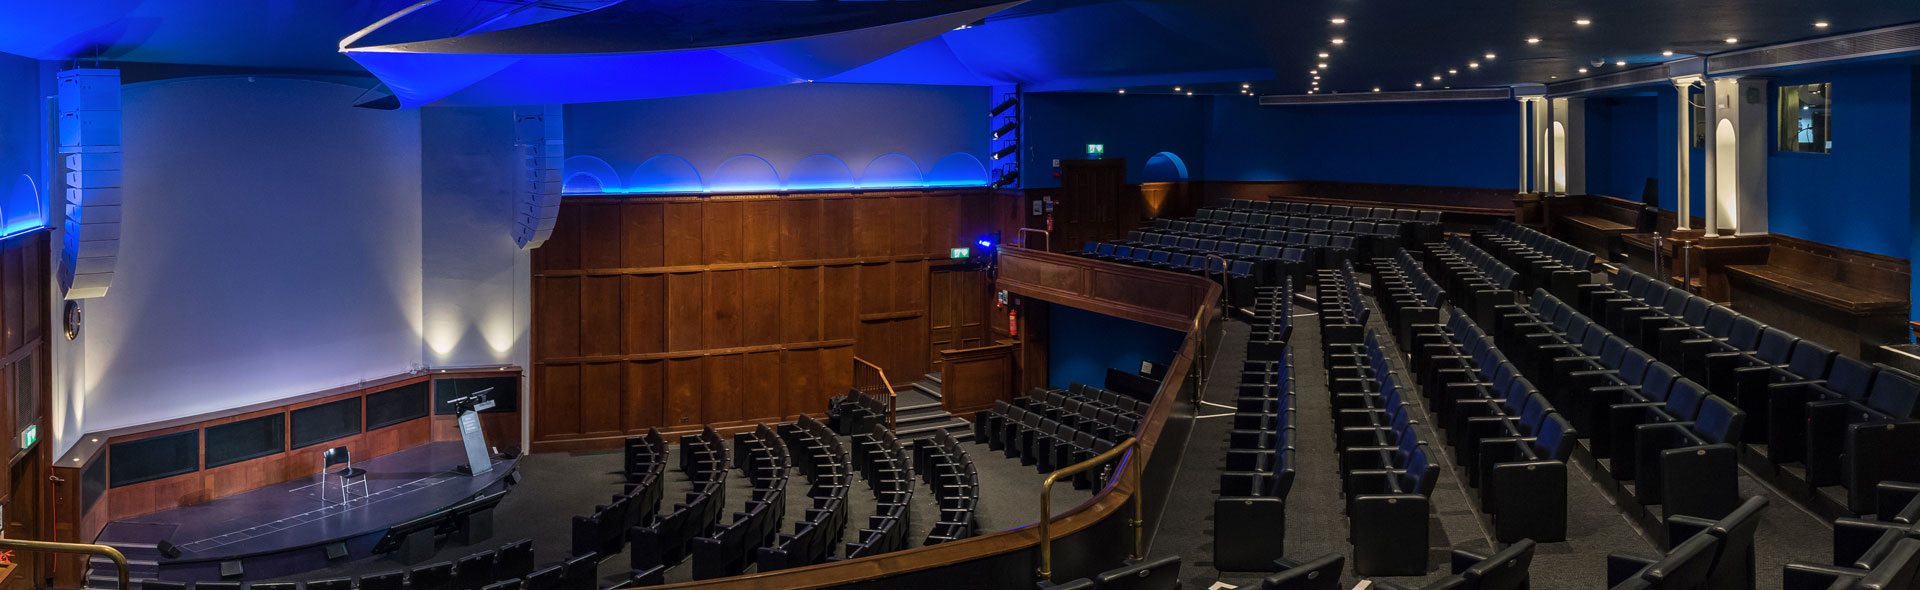 The Royal Geographical Society in London selects Uniline Compact